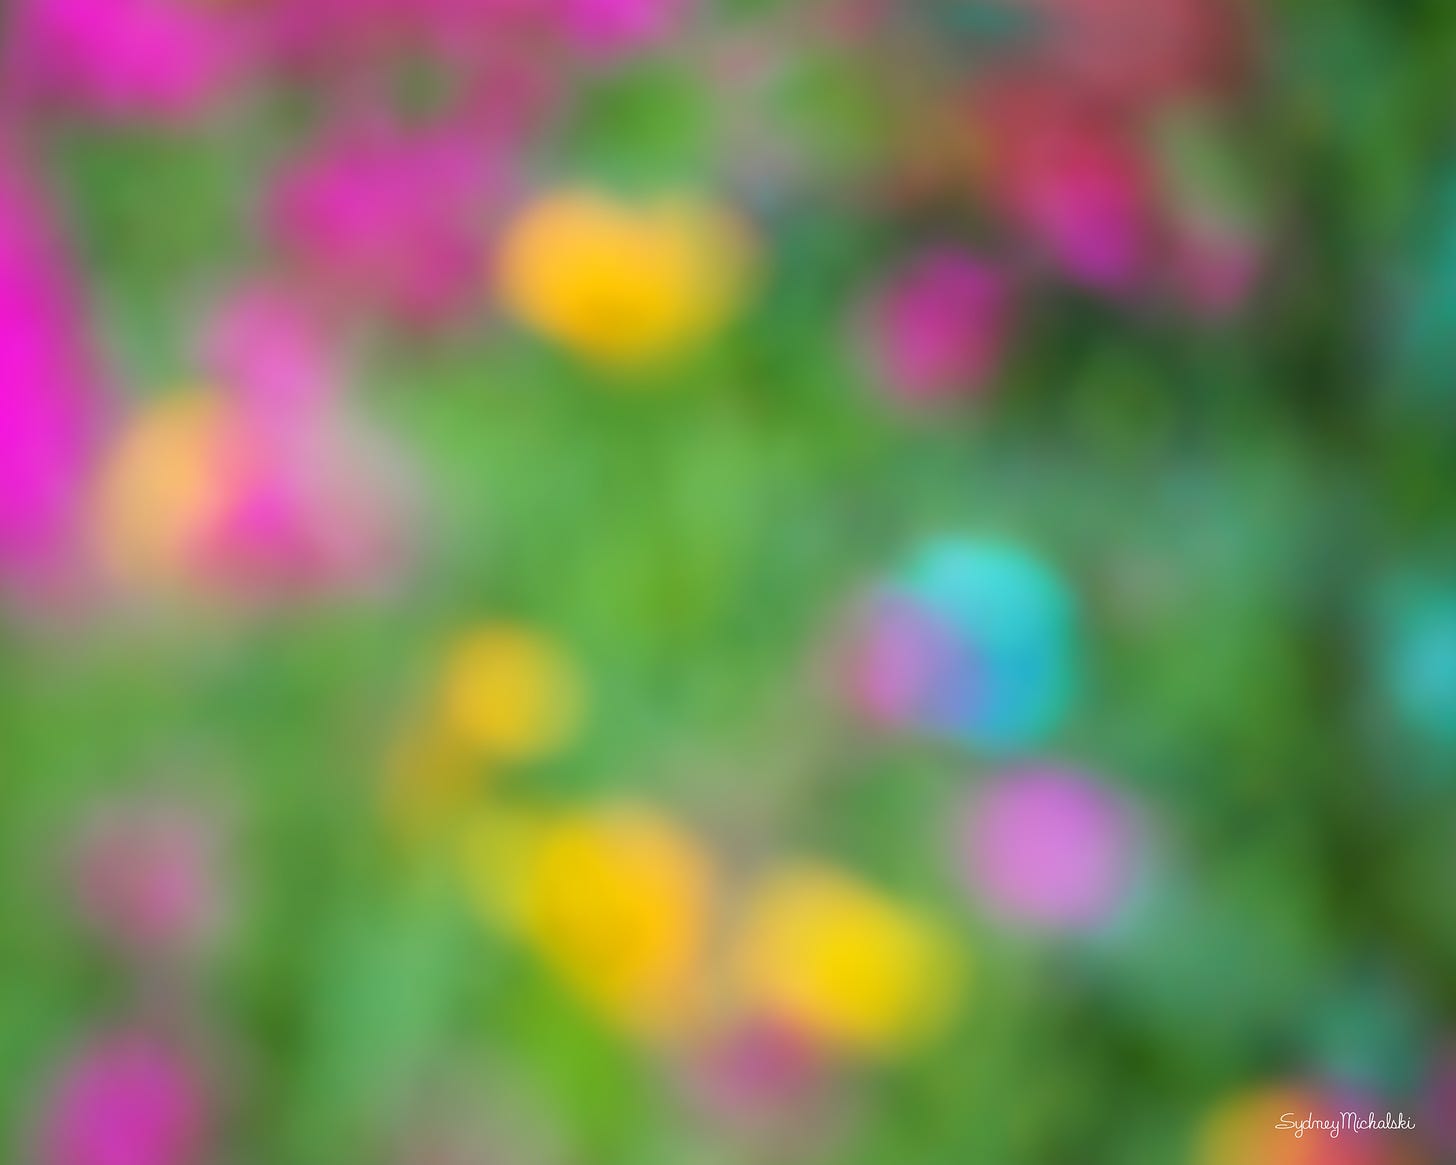 An abstract image uses a soft focus on a wildflower field, in pink, orange, turquoise, and green.